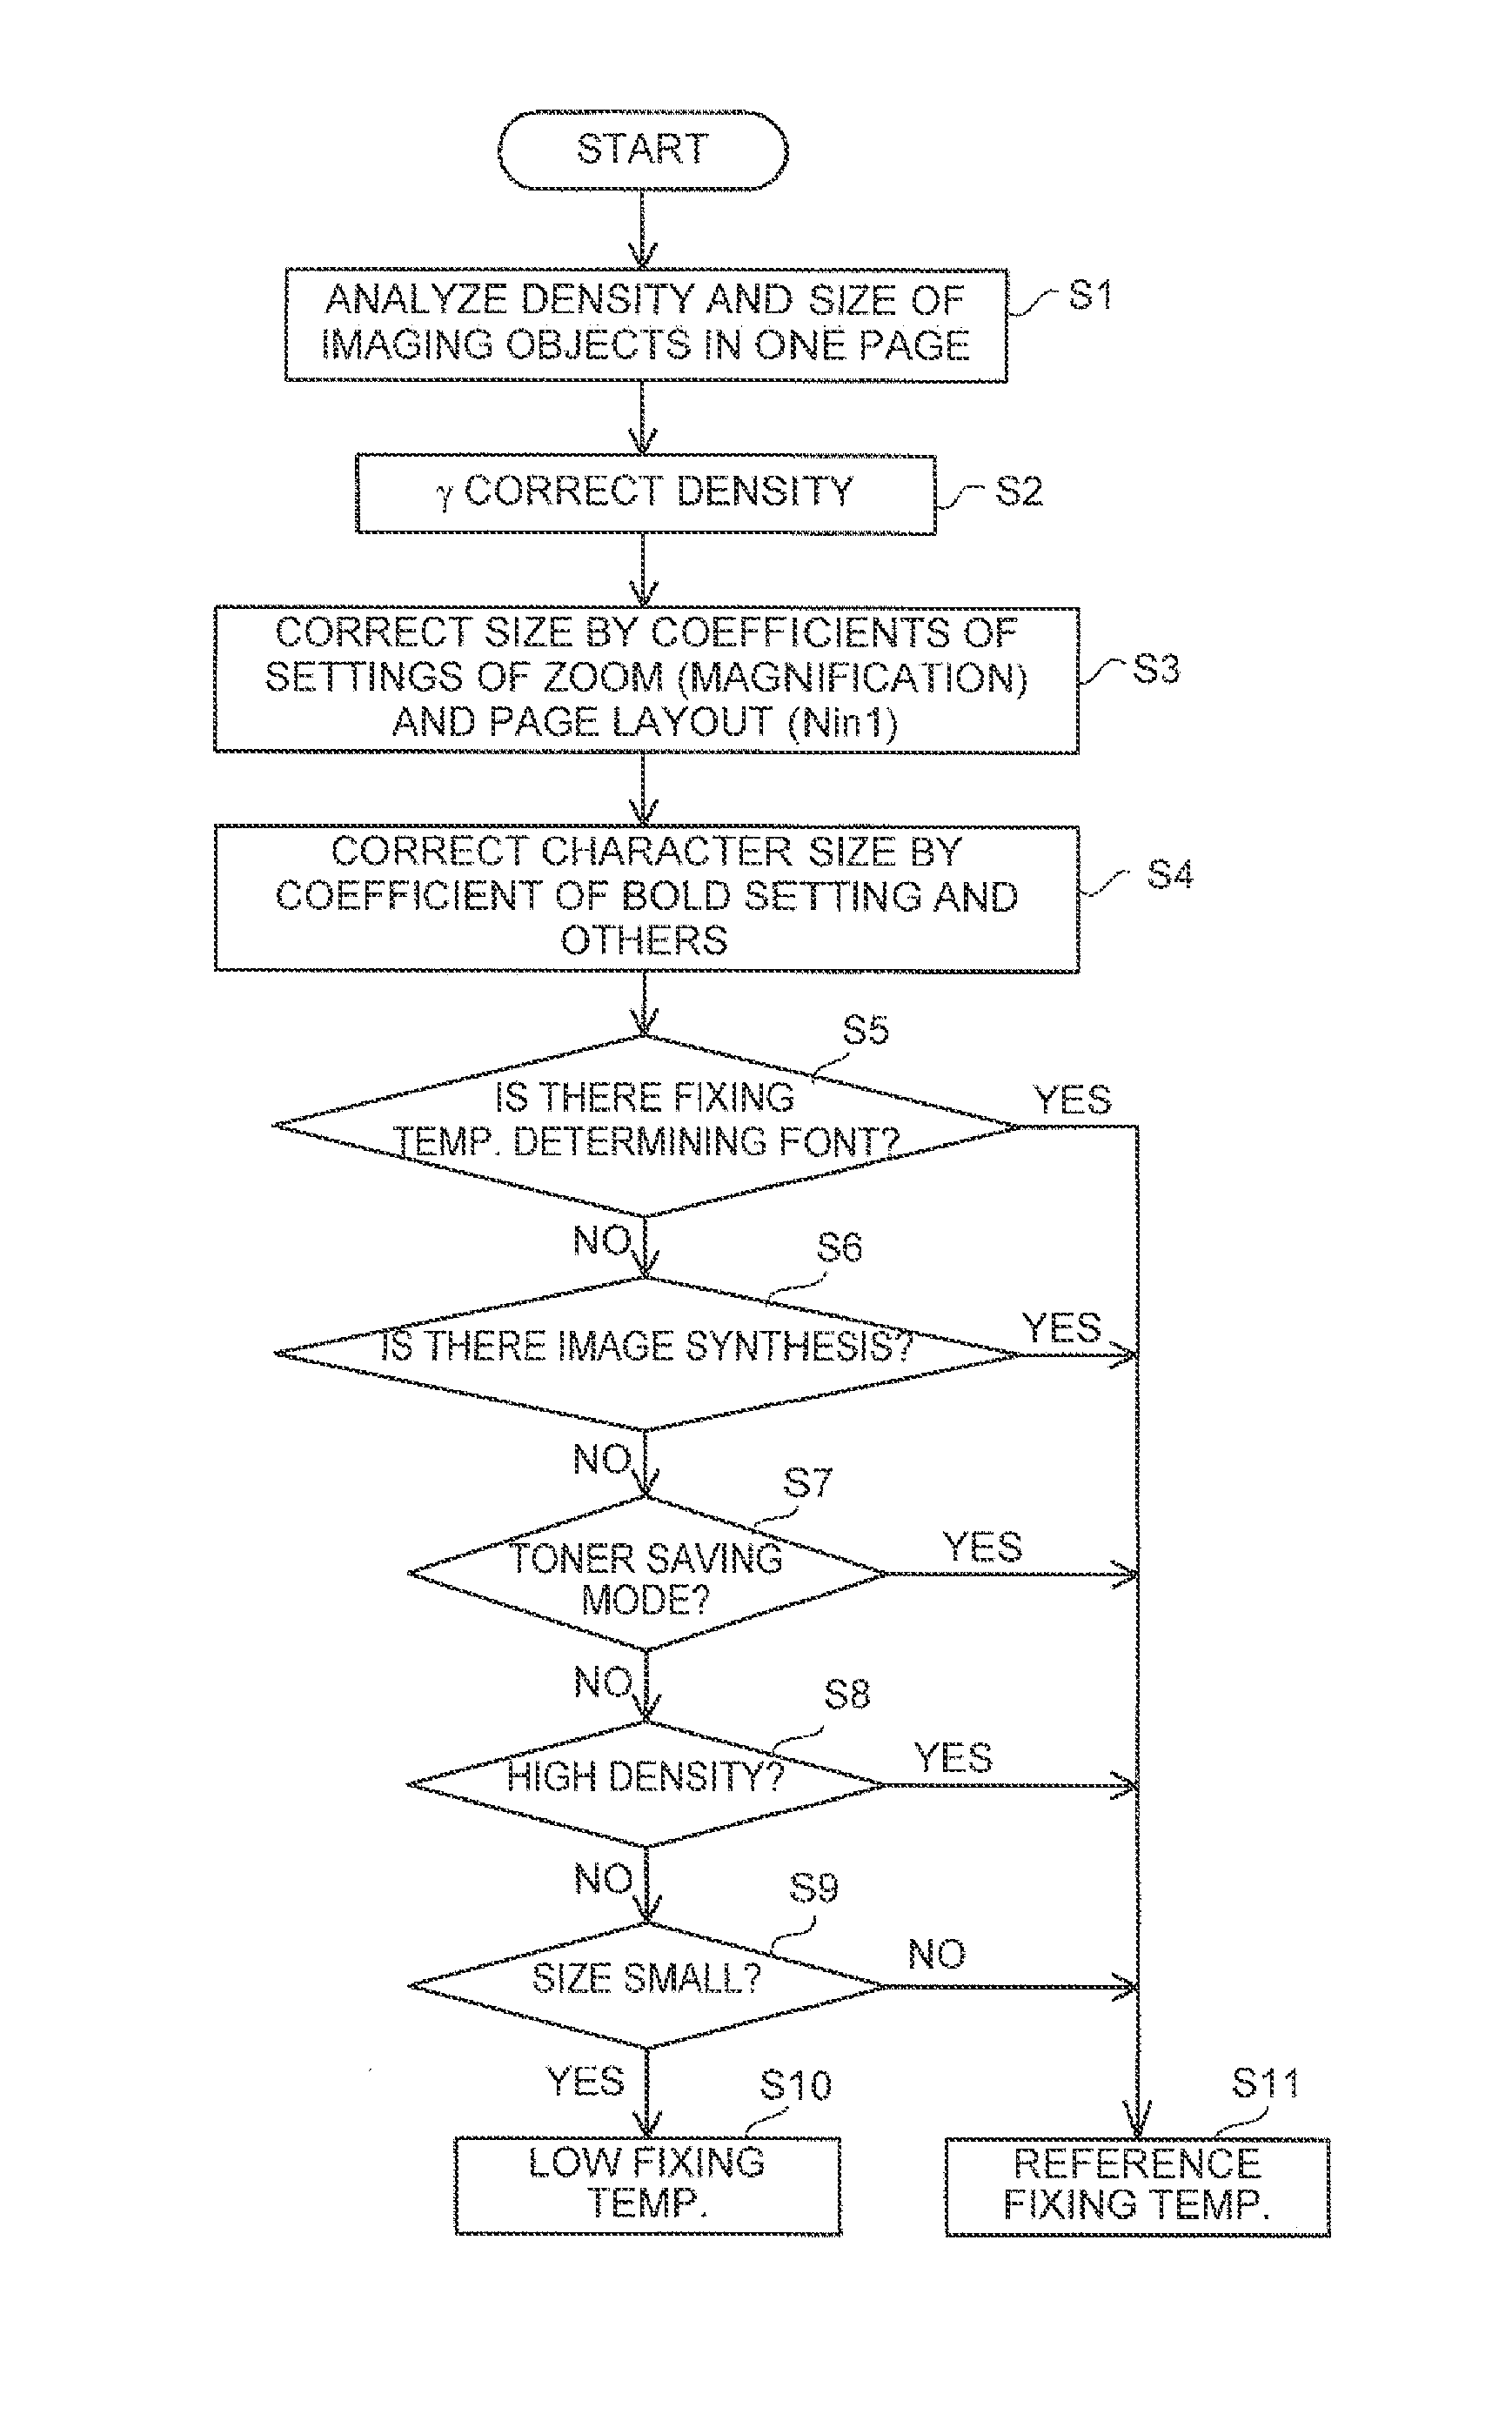 Image forming apparatus, image forming method, and non-transitory computer readable medium storing control program